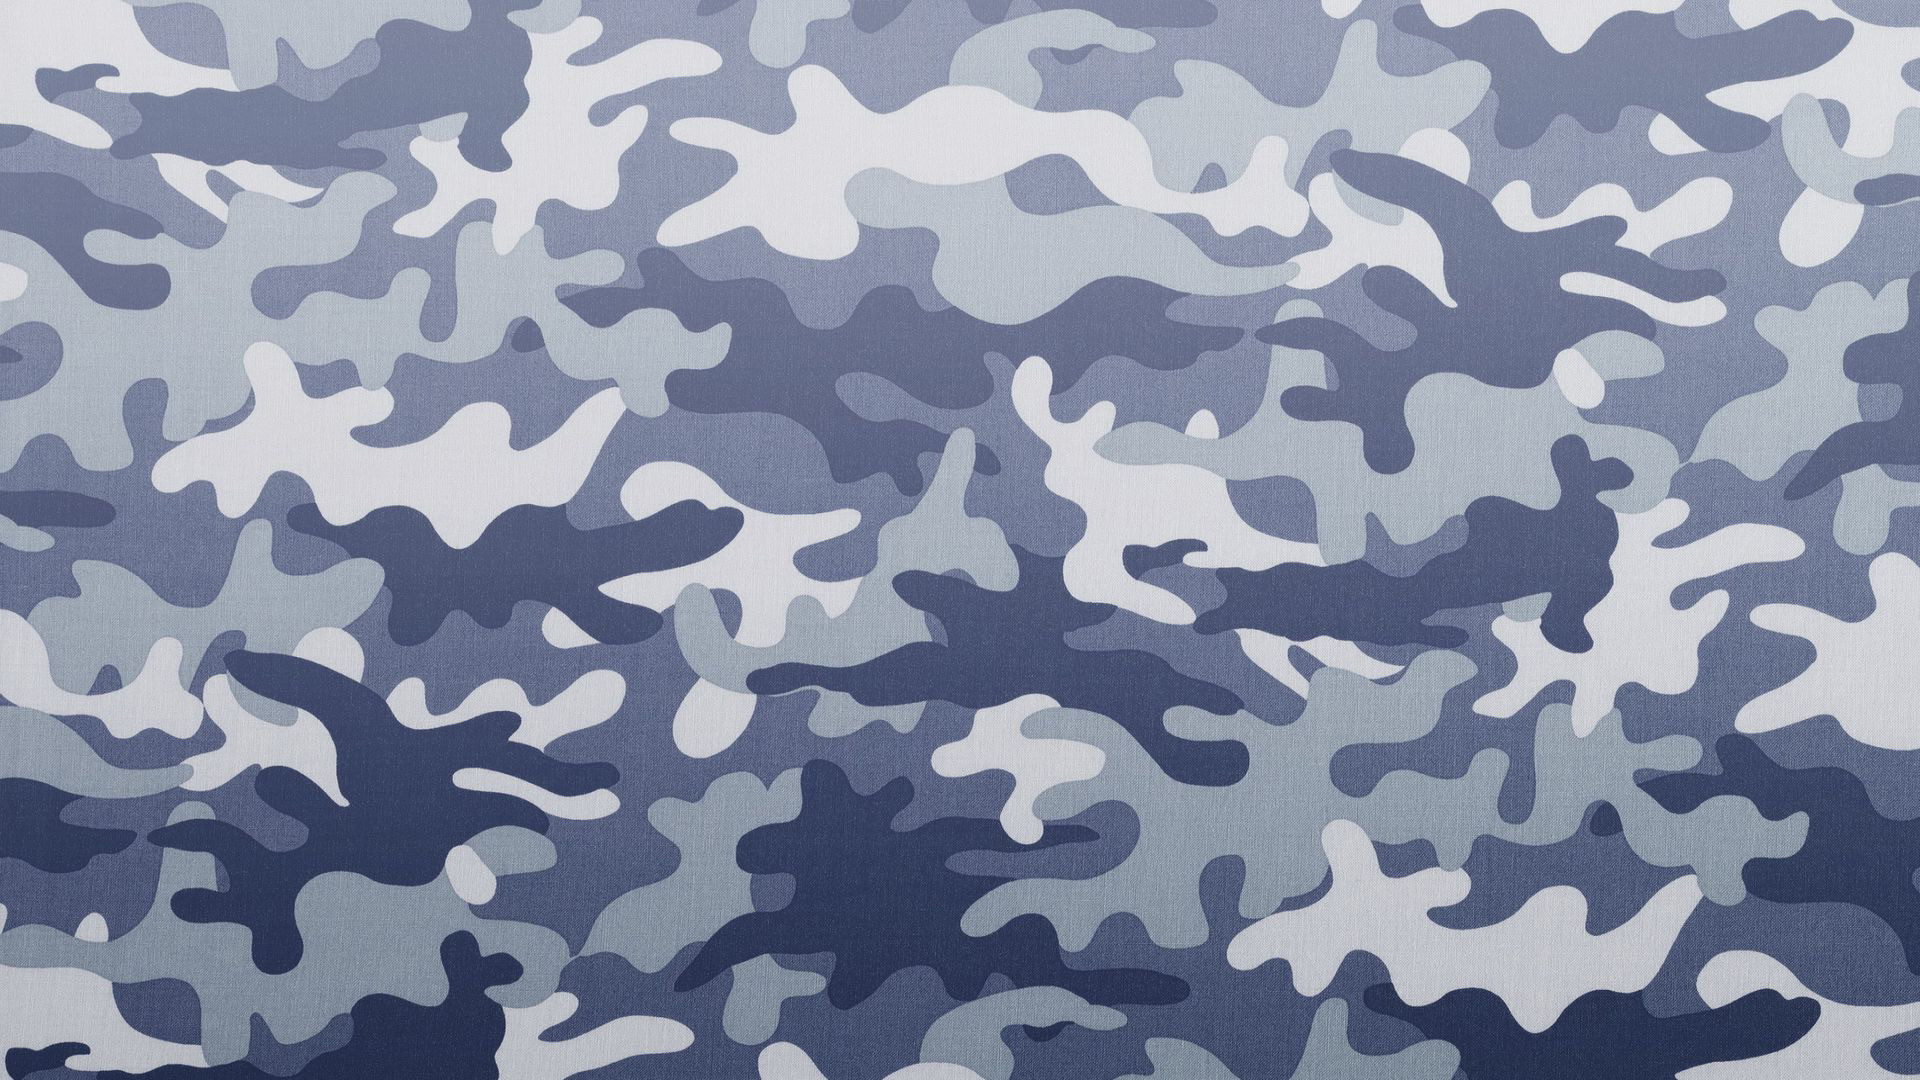 1920x1080 HD Camouflage Backgrounds.